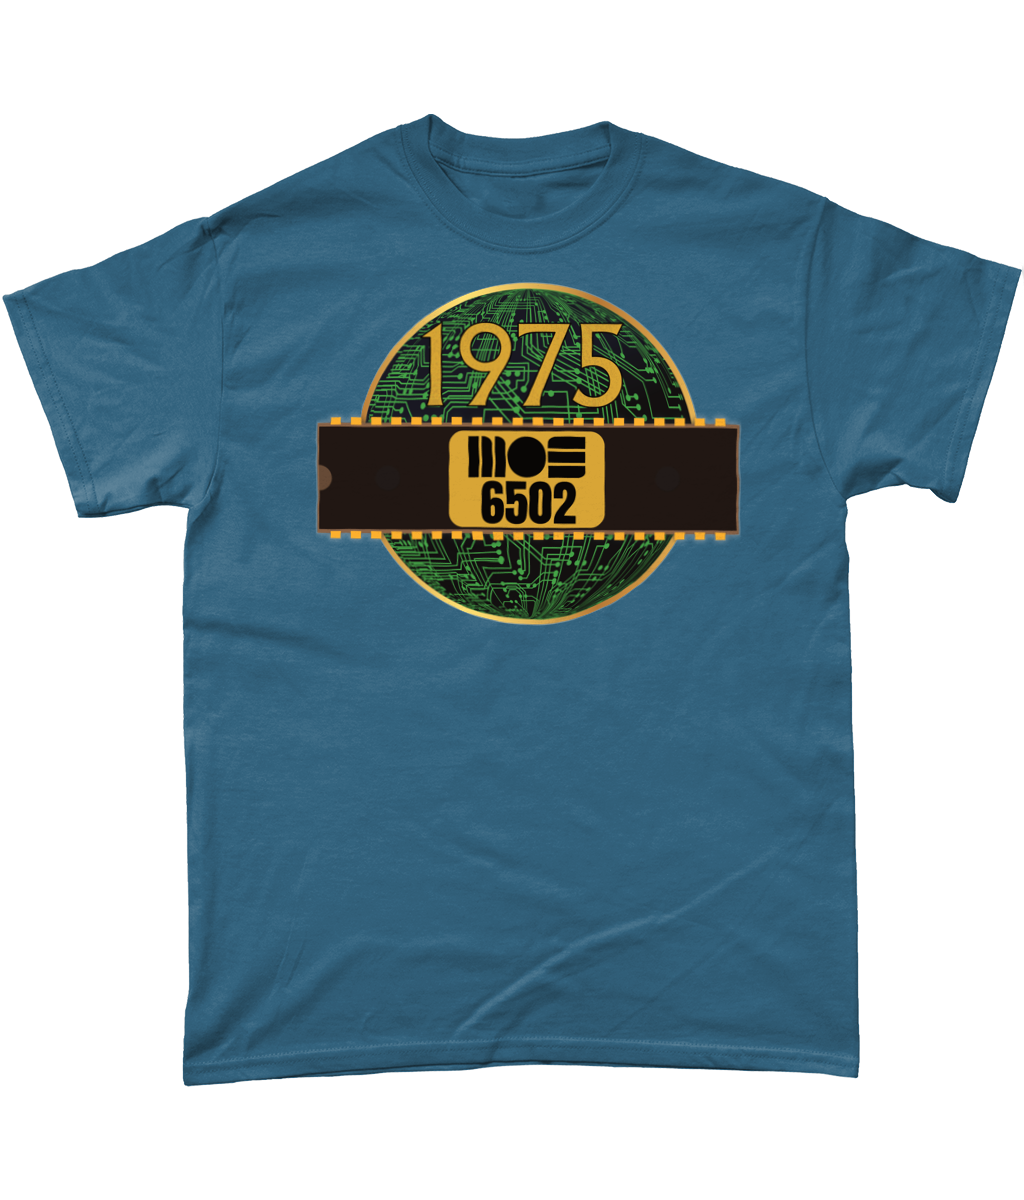 1975 MOS 6502 Cpu/Processor T-Shirt, Indigo T-shirtBlack T-shirt with a gold circle with a basic representation of a circuit board in green and a 40 pin chip across the front with MOS 6502 and 1975 written on it.